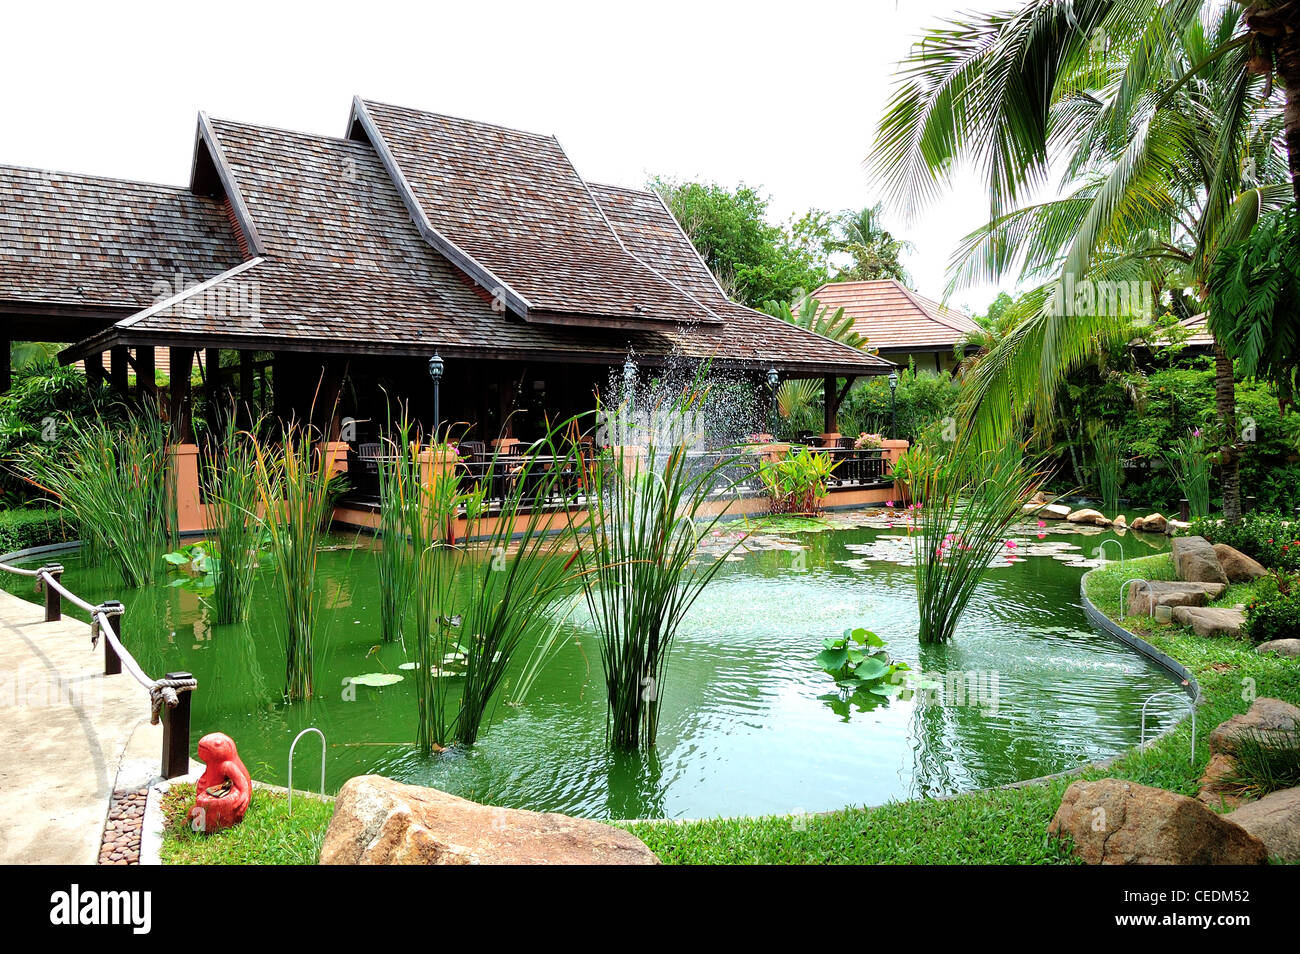 Outdoor restaurant and green pond at the luxury hotel, Samui island, Thailand Stock Photo